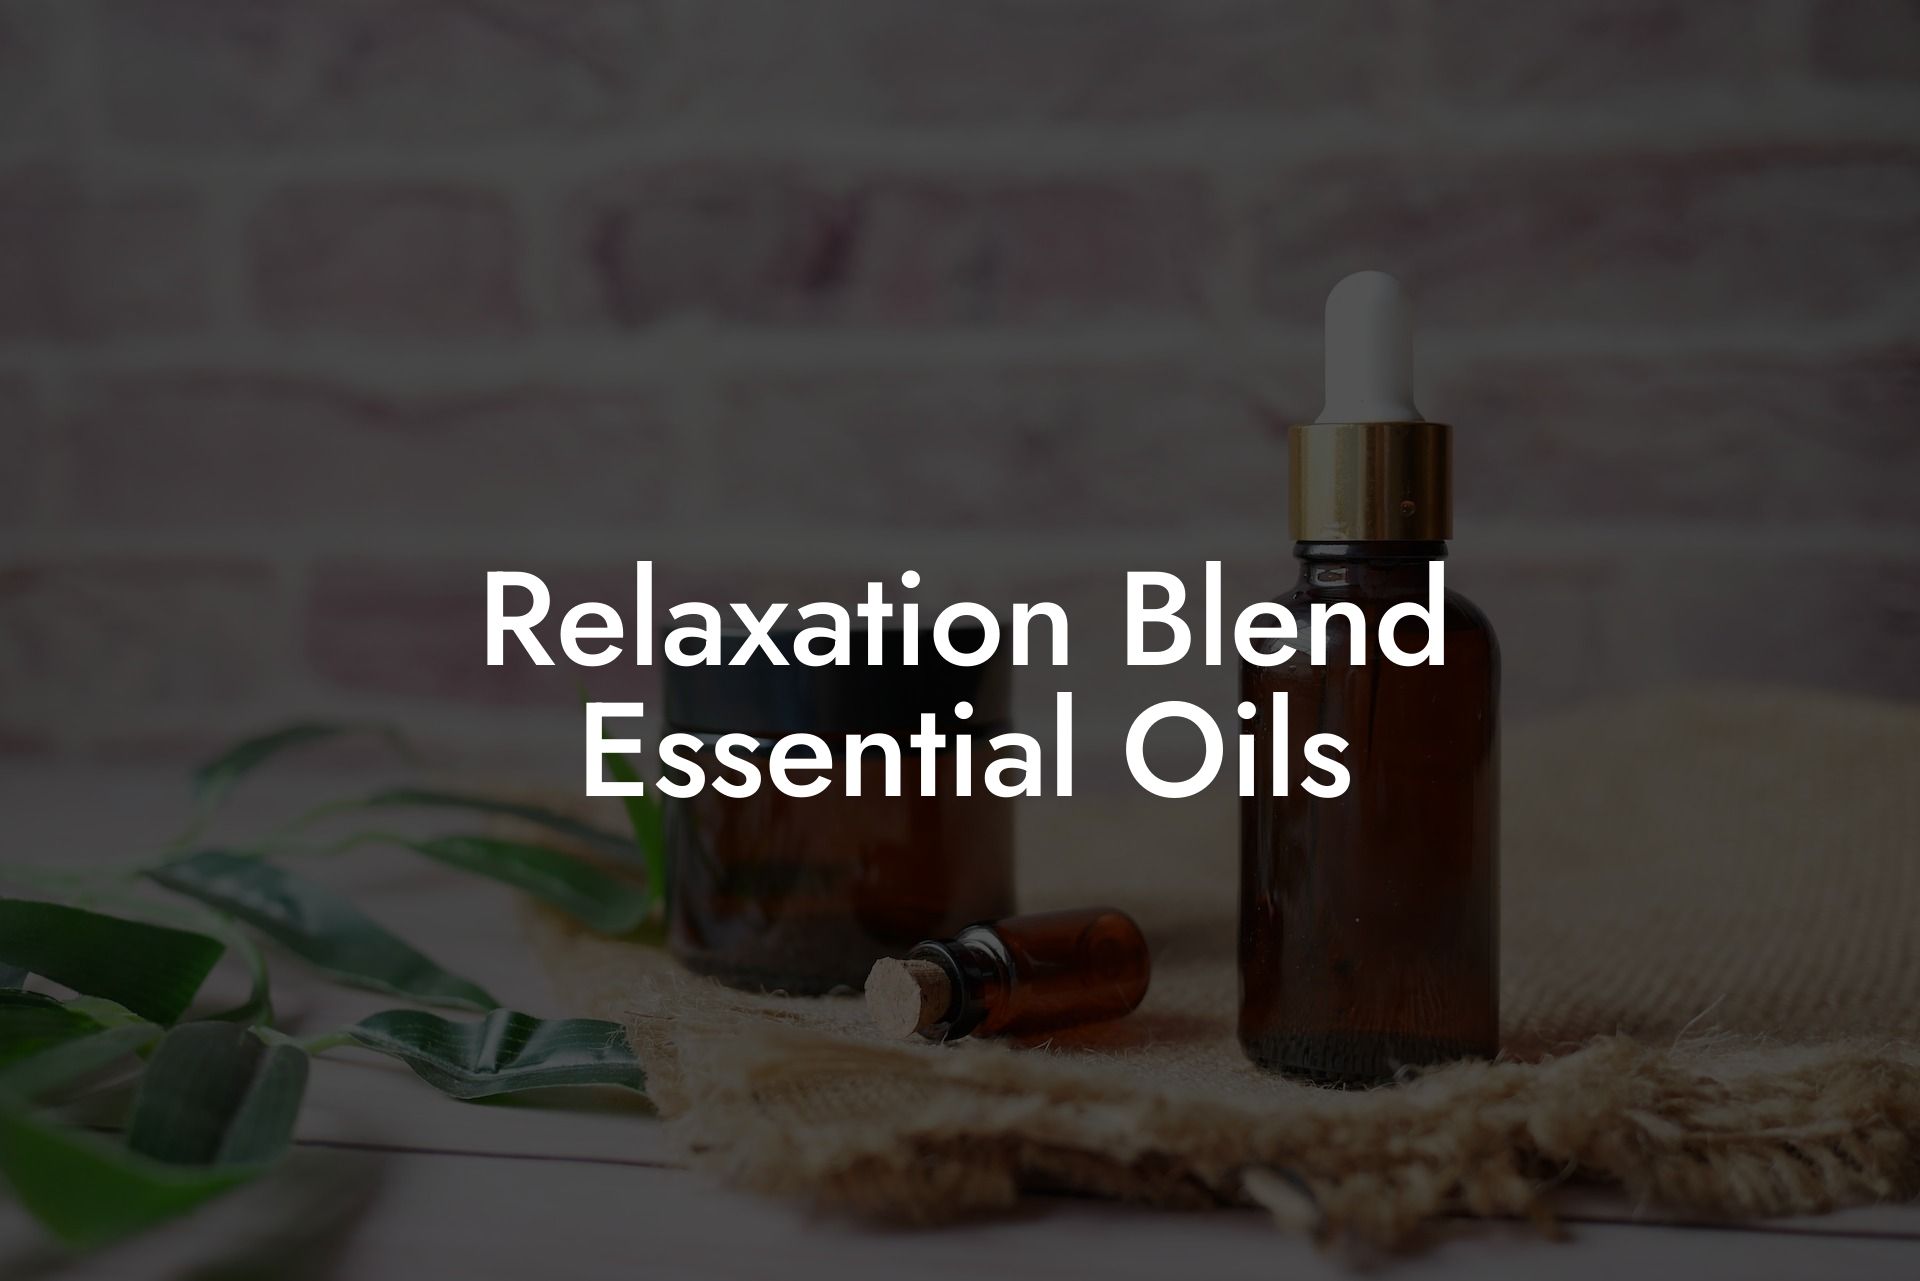 Relaxation Blend Essential Oils